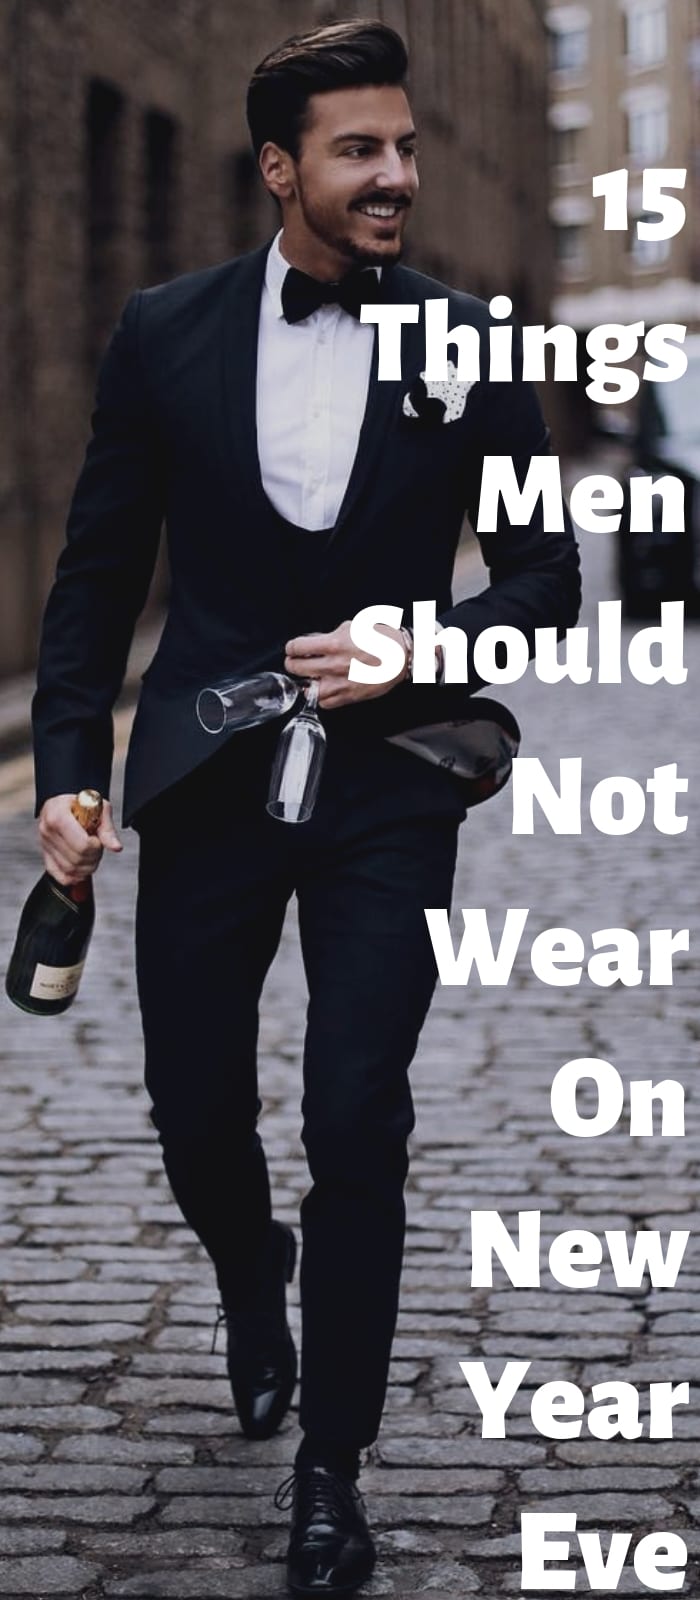 15 Things Men Should Not Wear On New Year Eve.